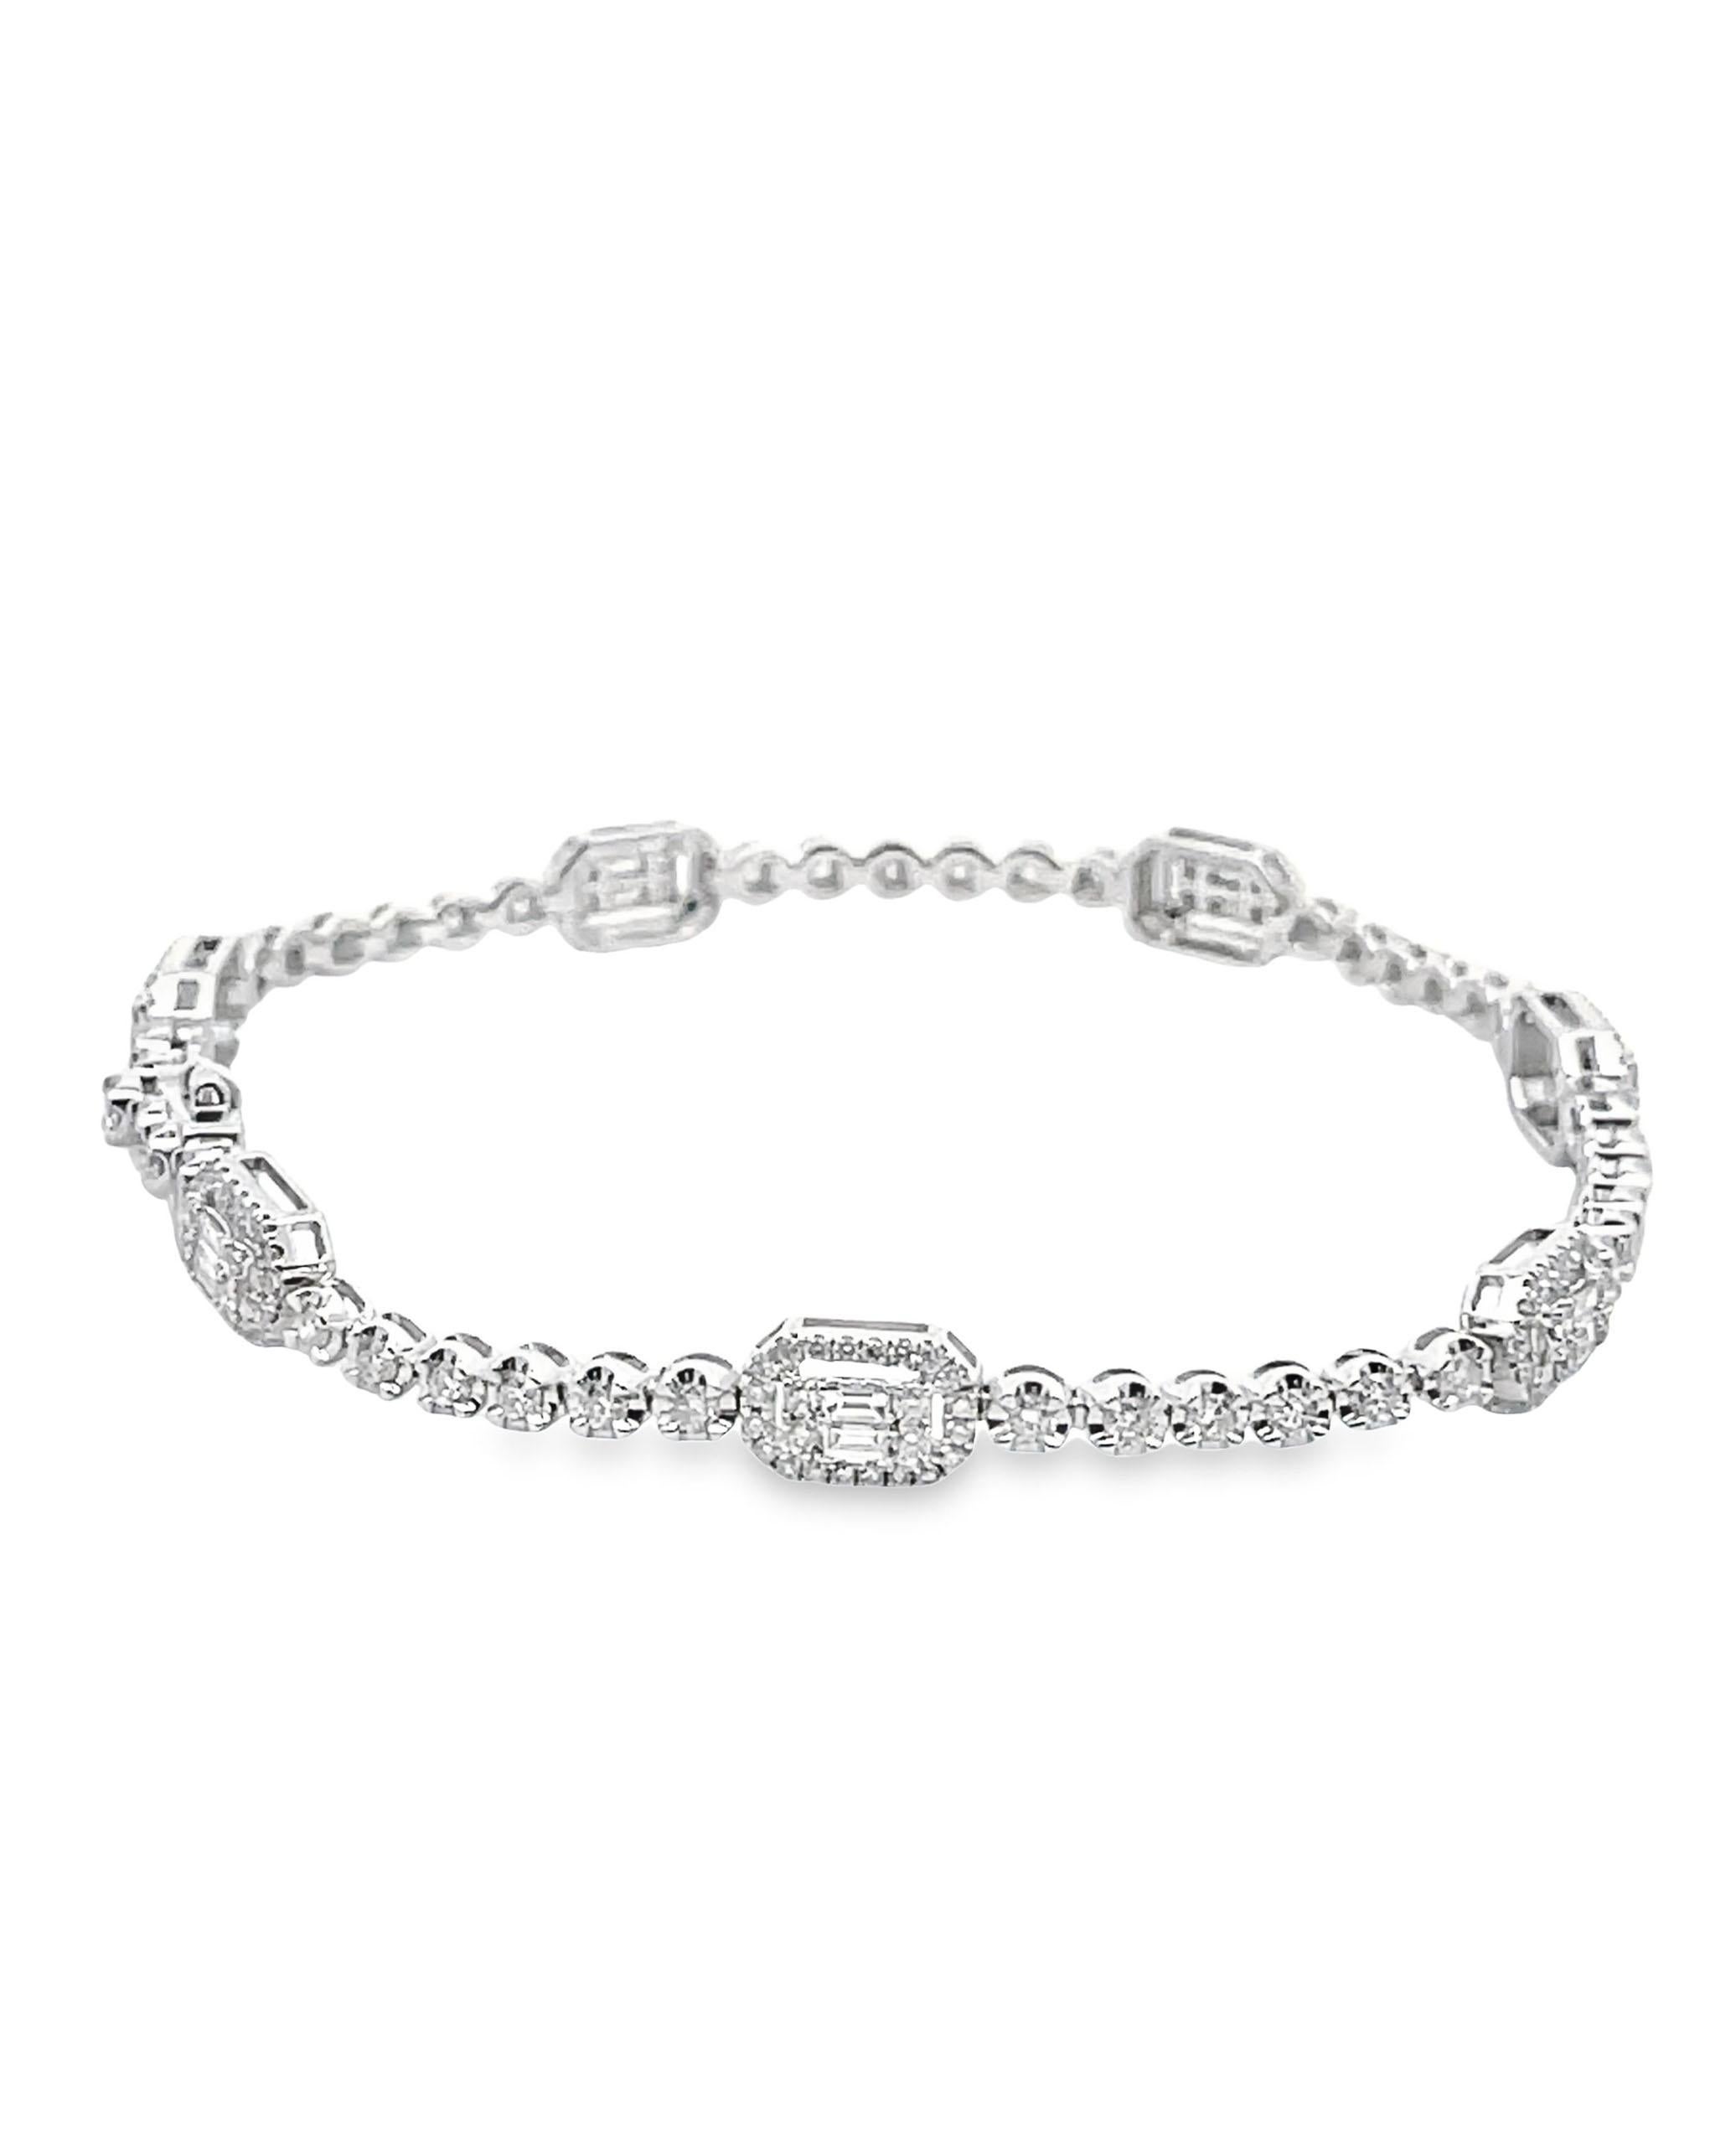 Women's 18K White Gold Tennis Bracelet with Round and Baguette Diamonds For Sale